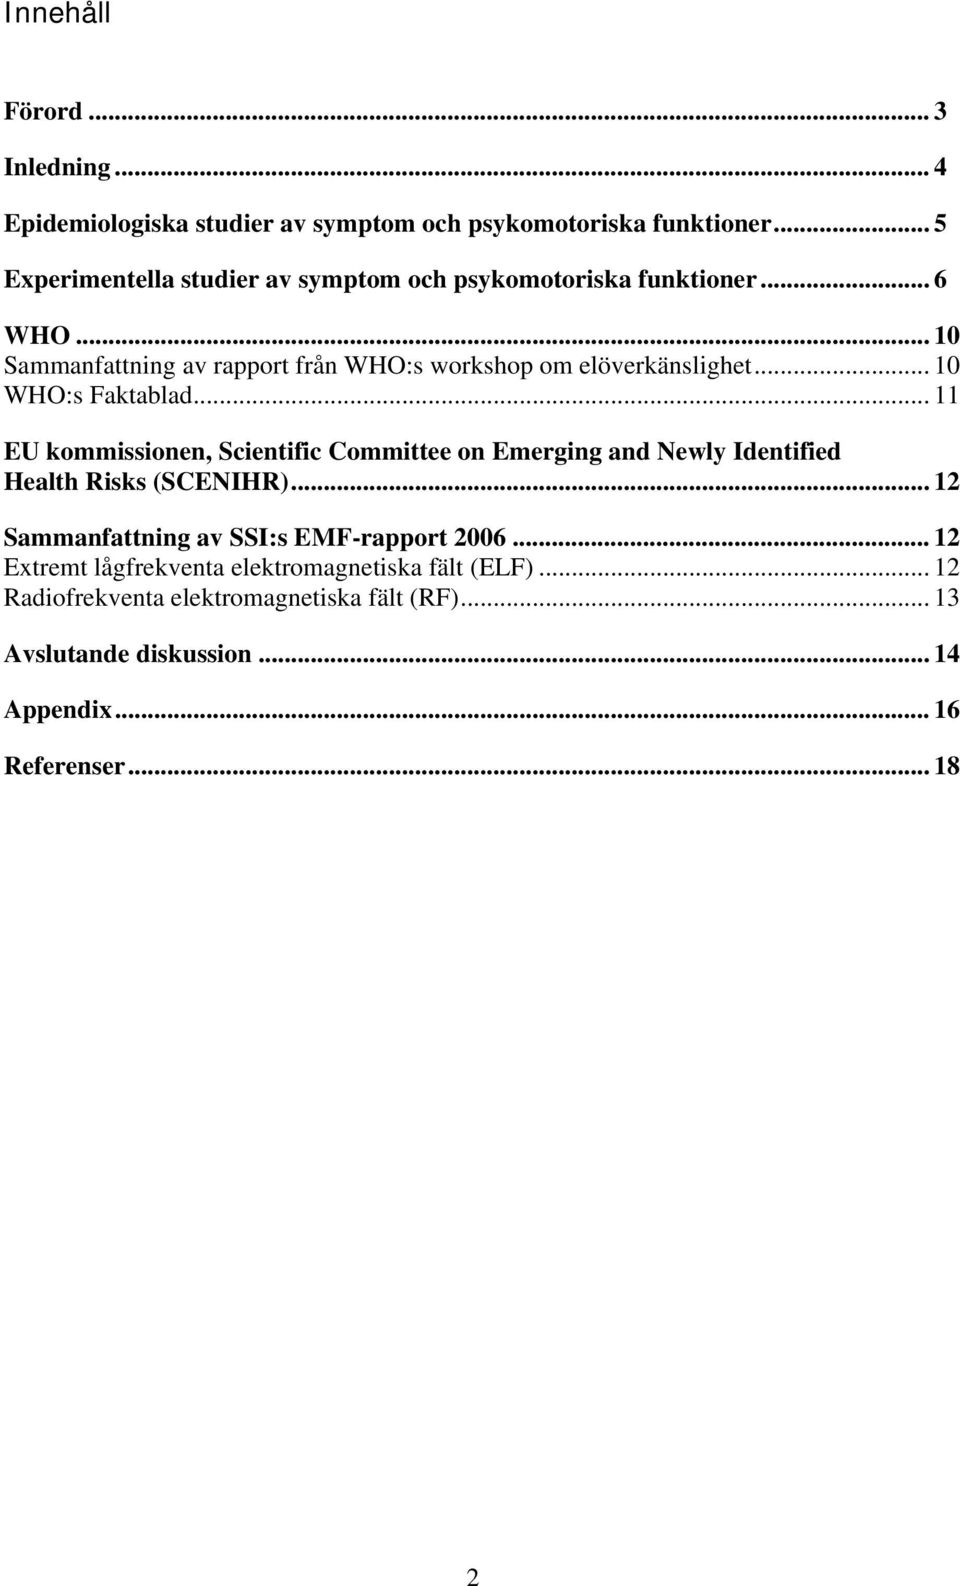 .. 10 WHO:s Faktablad... 11 EU kommissionen, Scientific Committee on Emerging and Newly Identified Health Risks (SCENIHR).